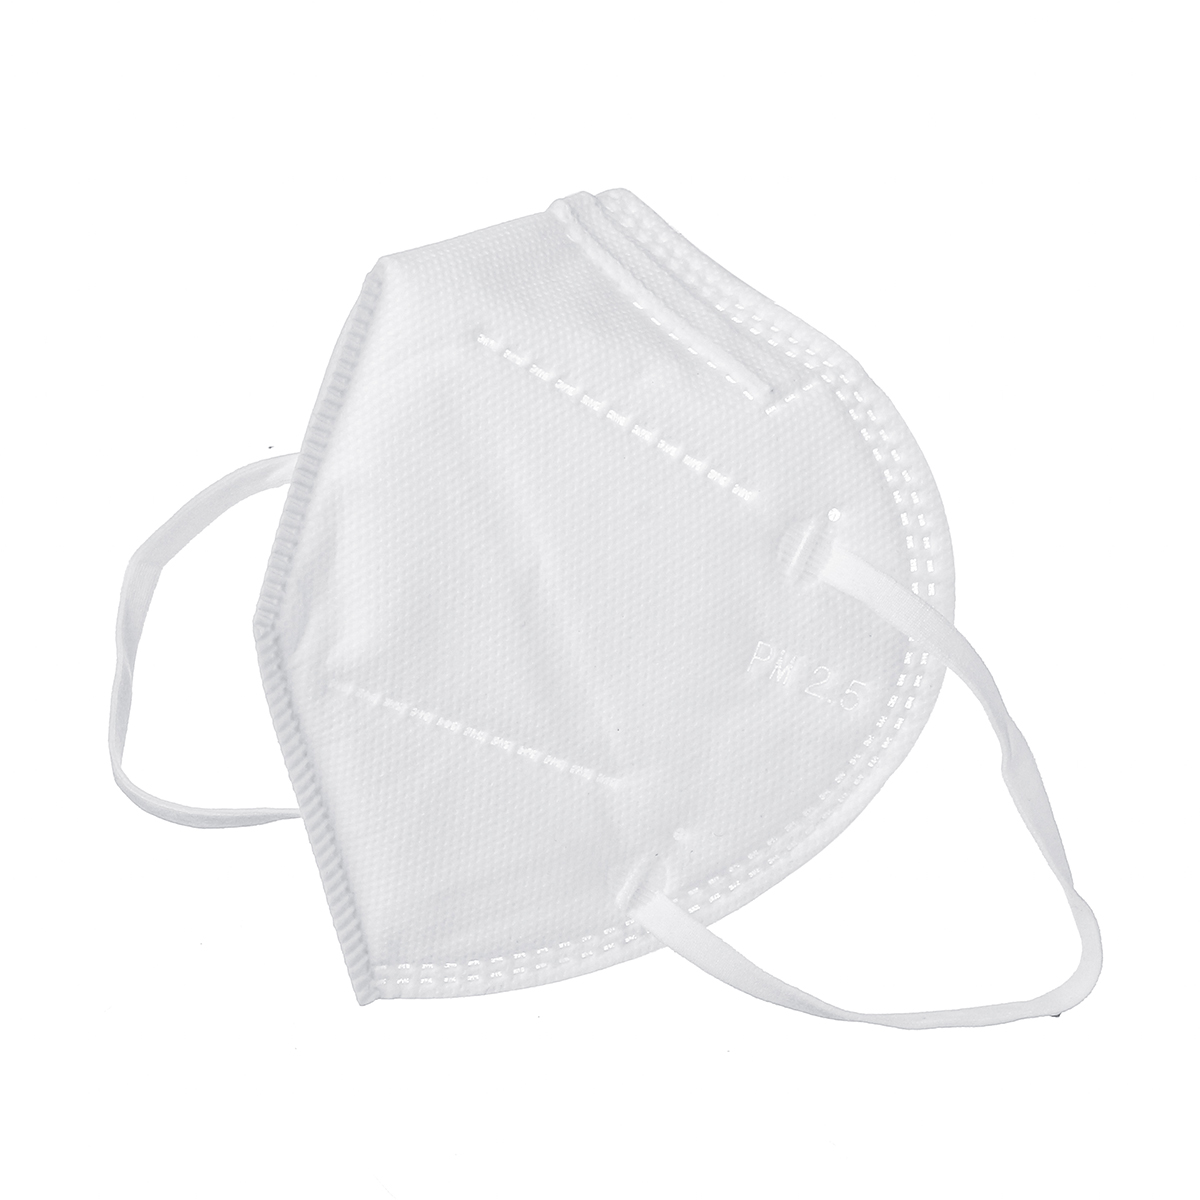 2Pcs-PM25-High-Quality-Mouth-Cover-Filter-Mask-Dustproof-Particulate-Respirator-1643214-5